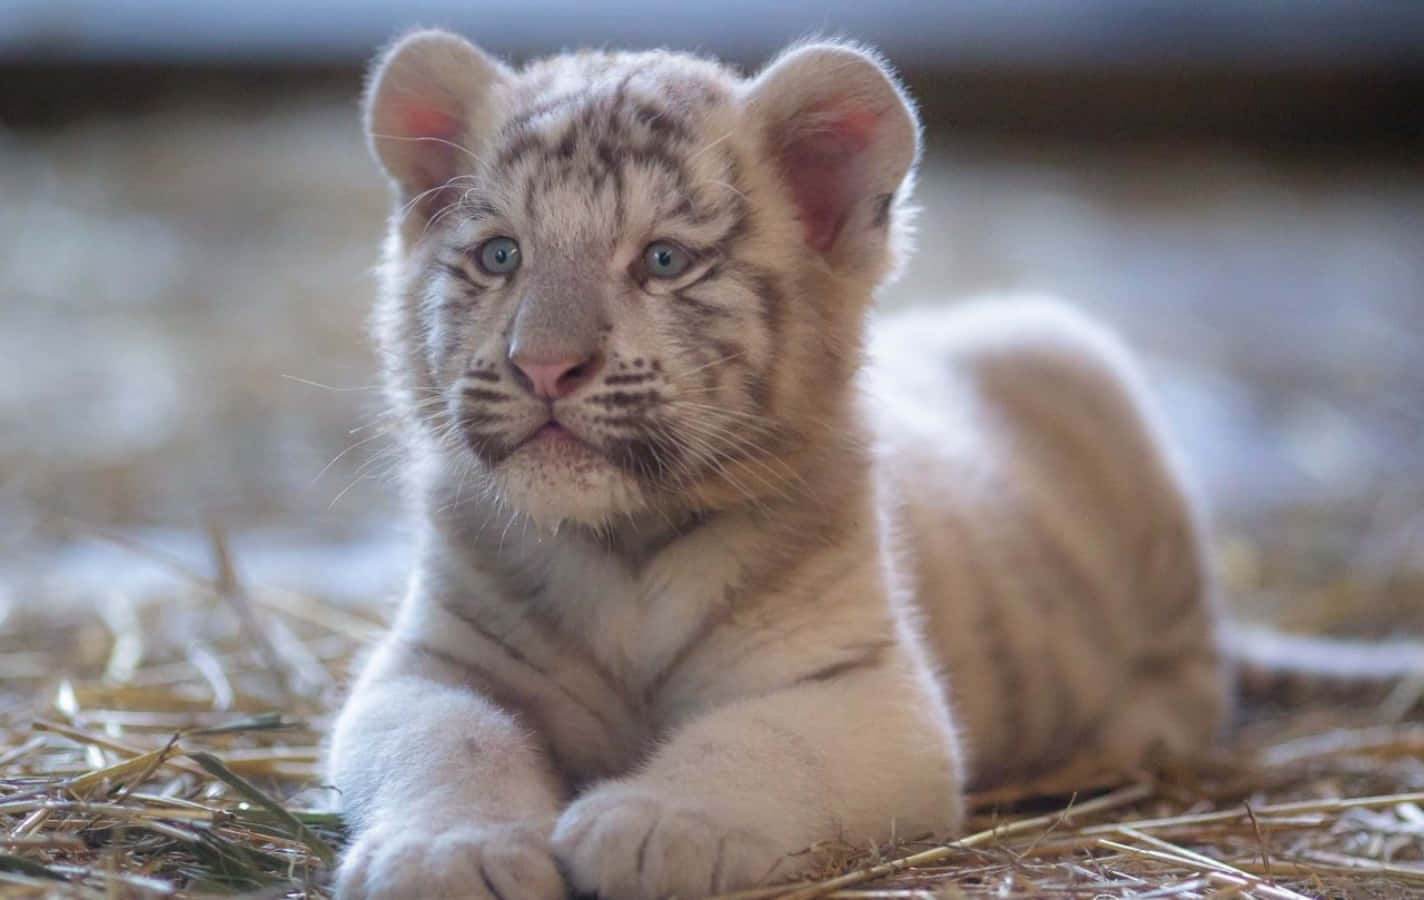 A small, cute baby tiger walking in the wild